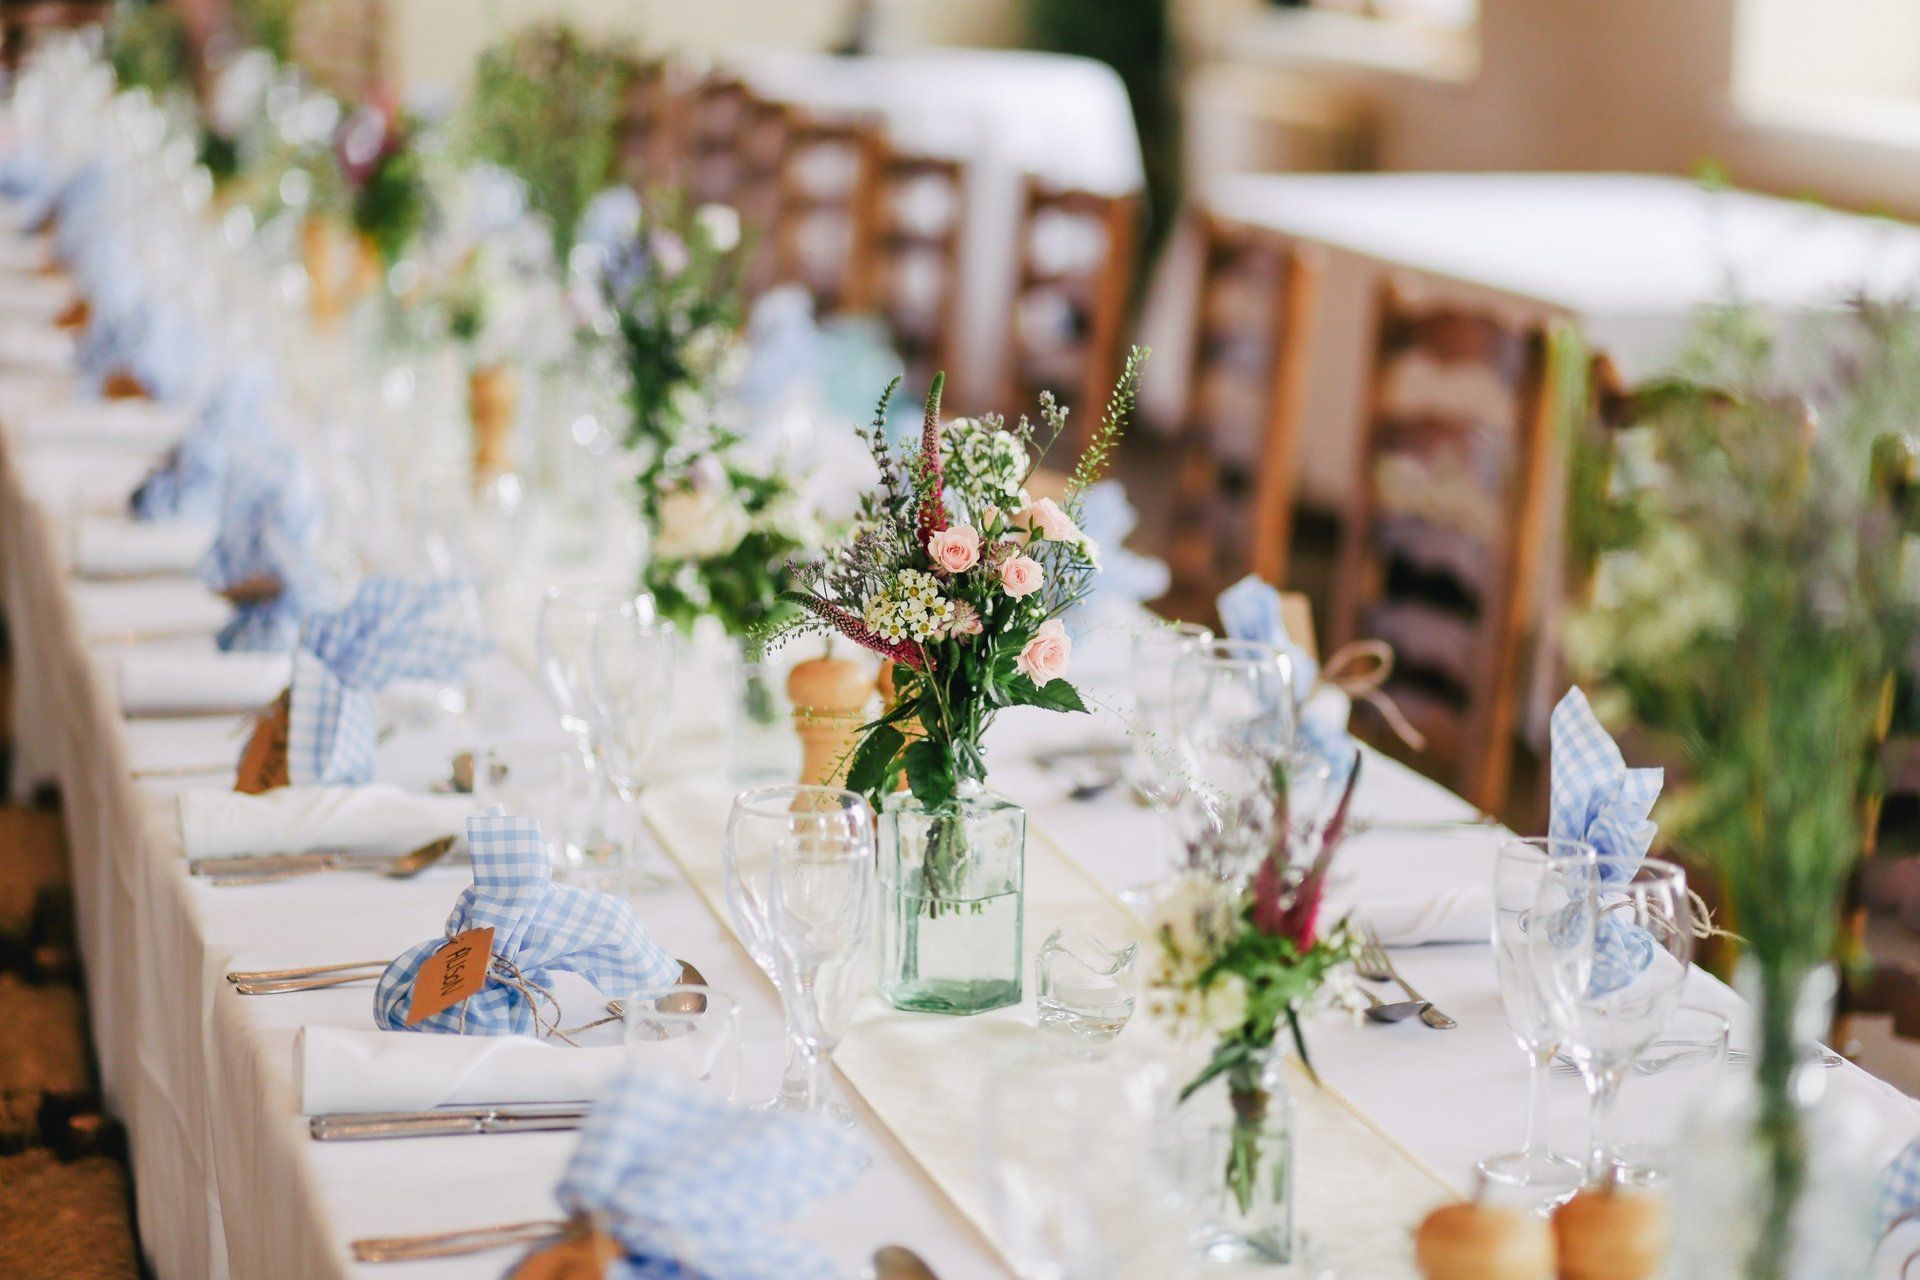 5 Things to Consider When Choosing Your Wedding Caterer